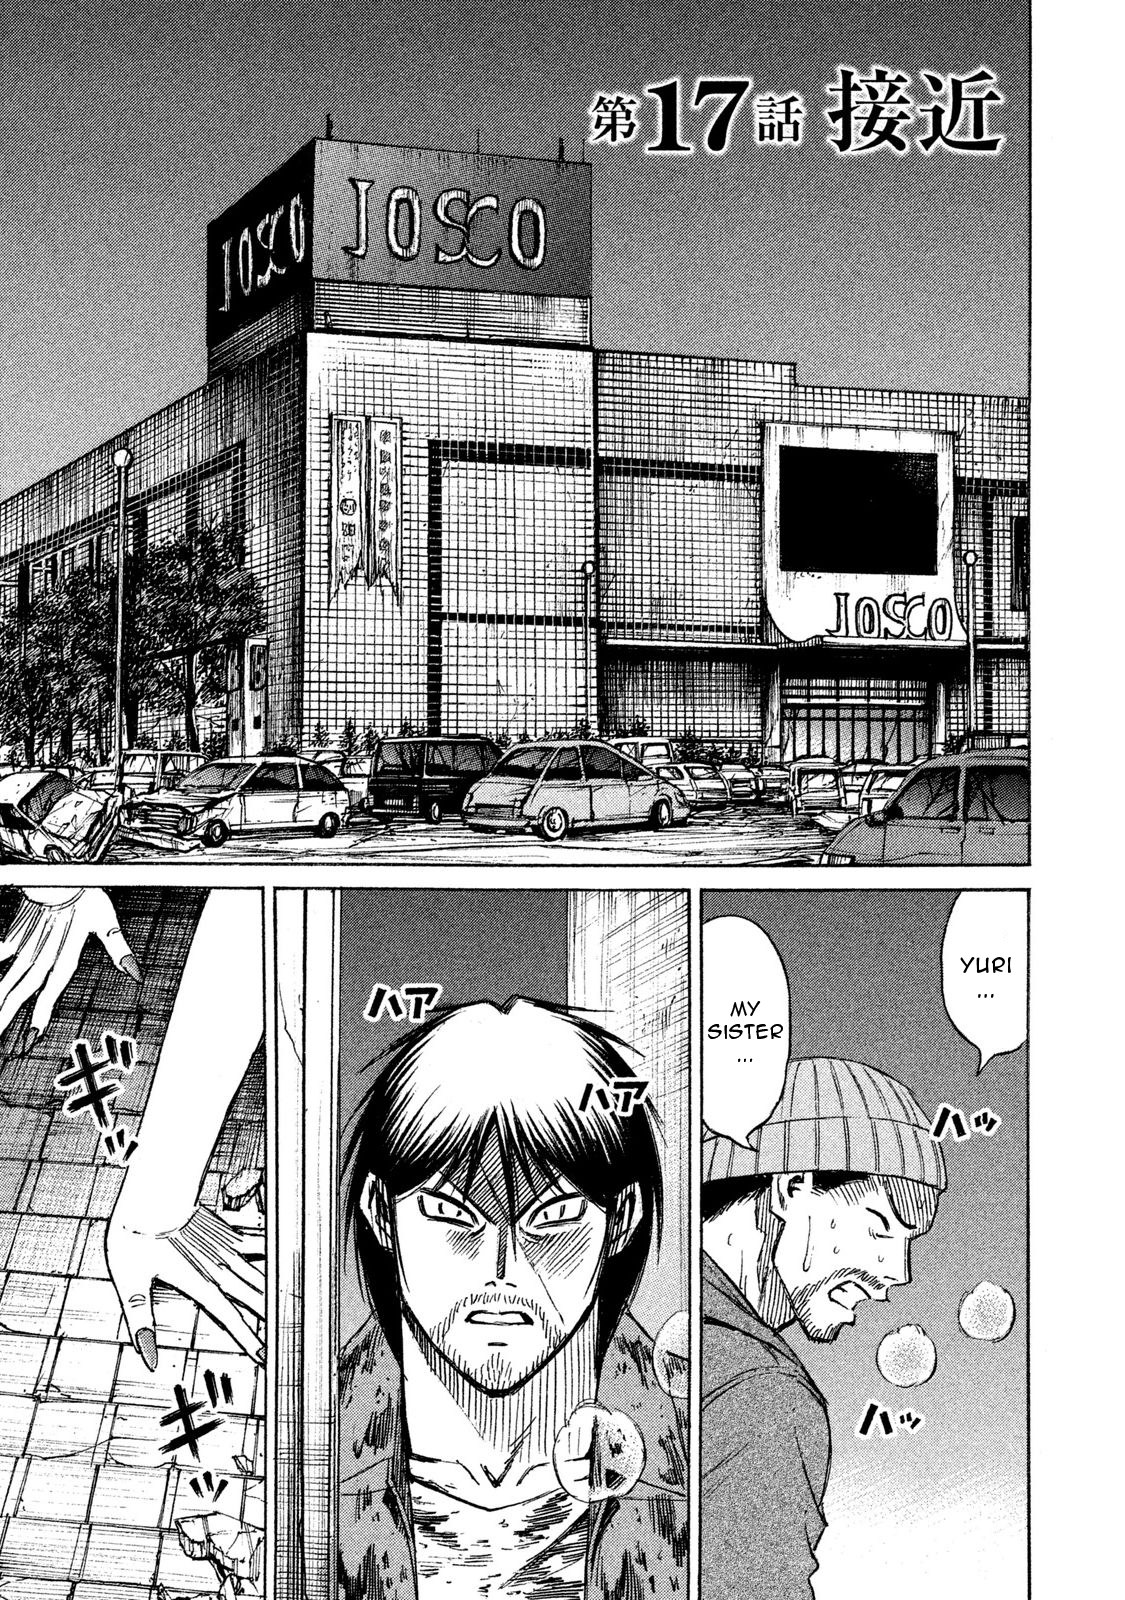 Higanjima - 48 Days Later Vol.2 Chapter 17: The Approaching Danger - Picture 1